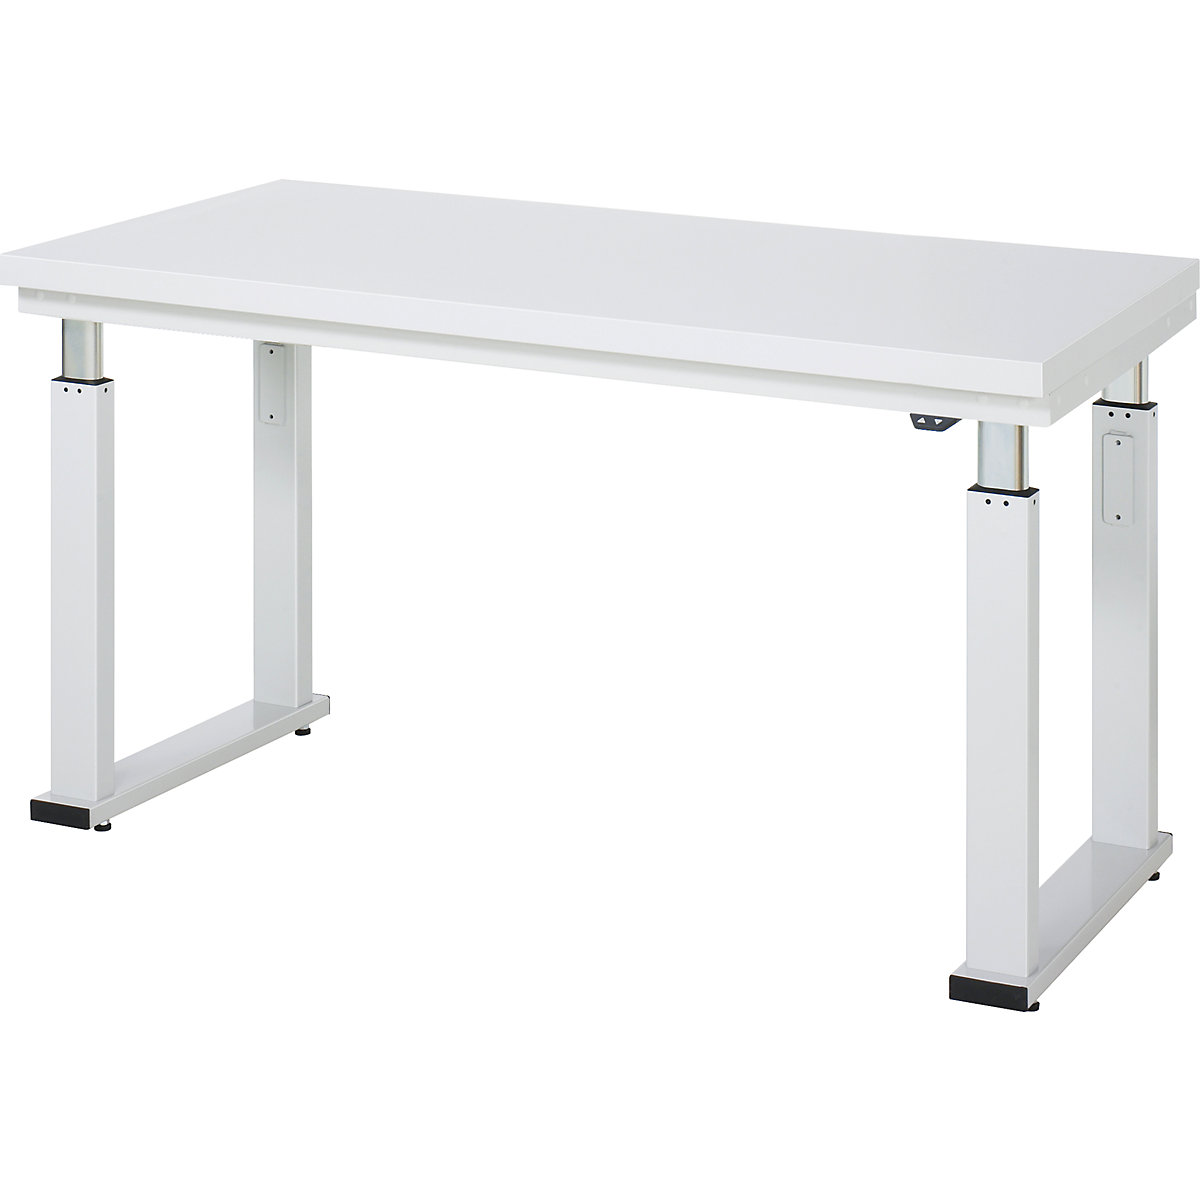 Work table, electric height adjustment – RAU, hardened laminate worktop, max. load 600 kg, WxD 1500 x 700 mm-6